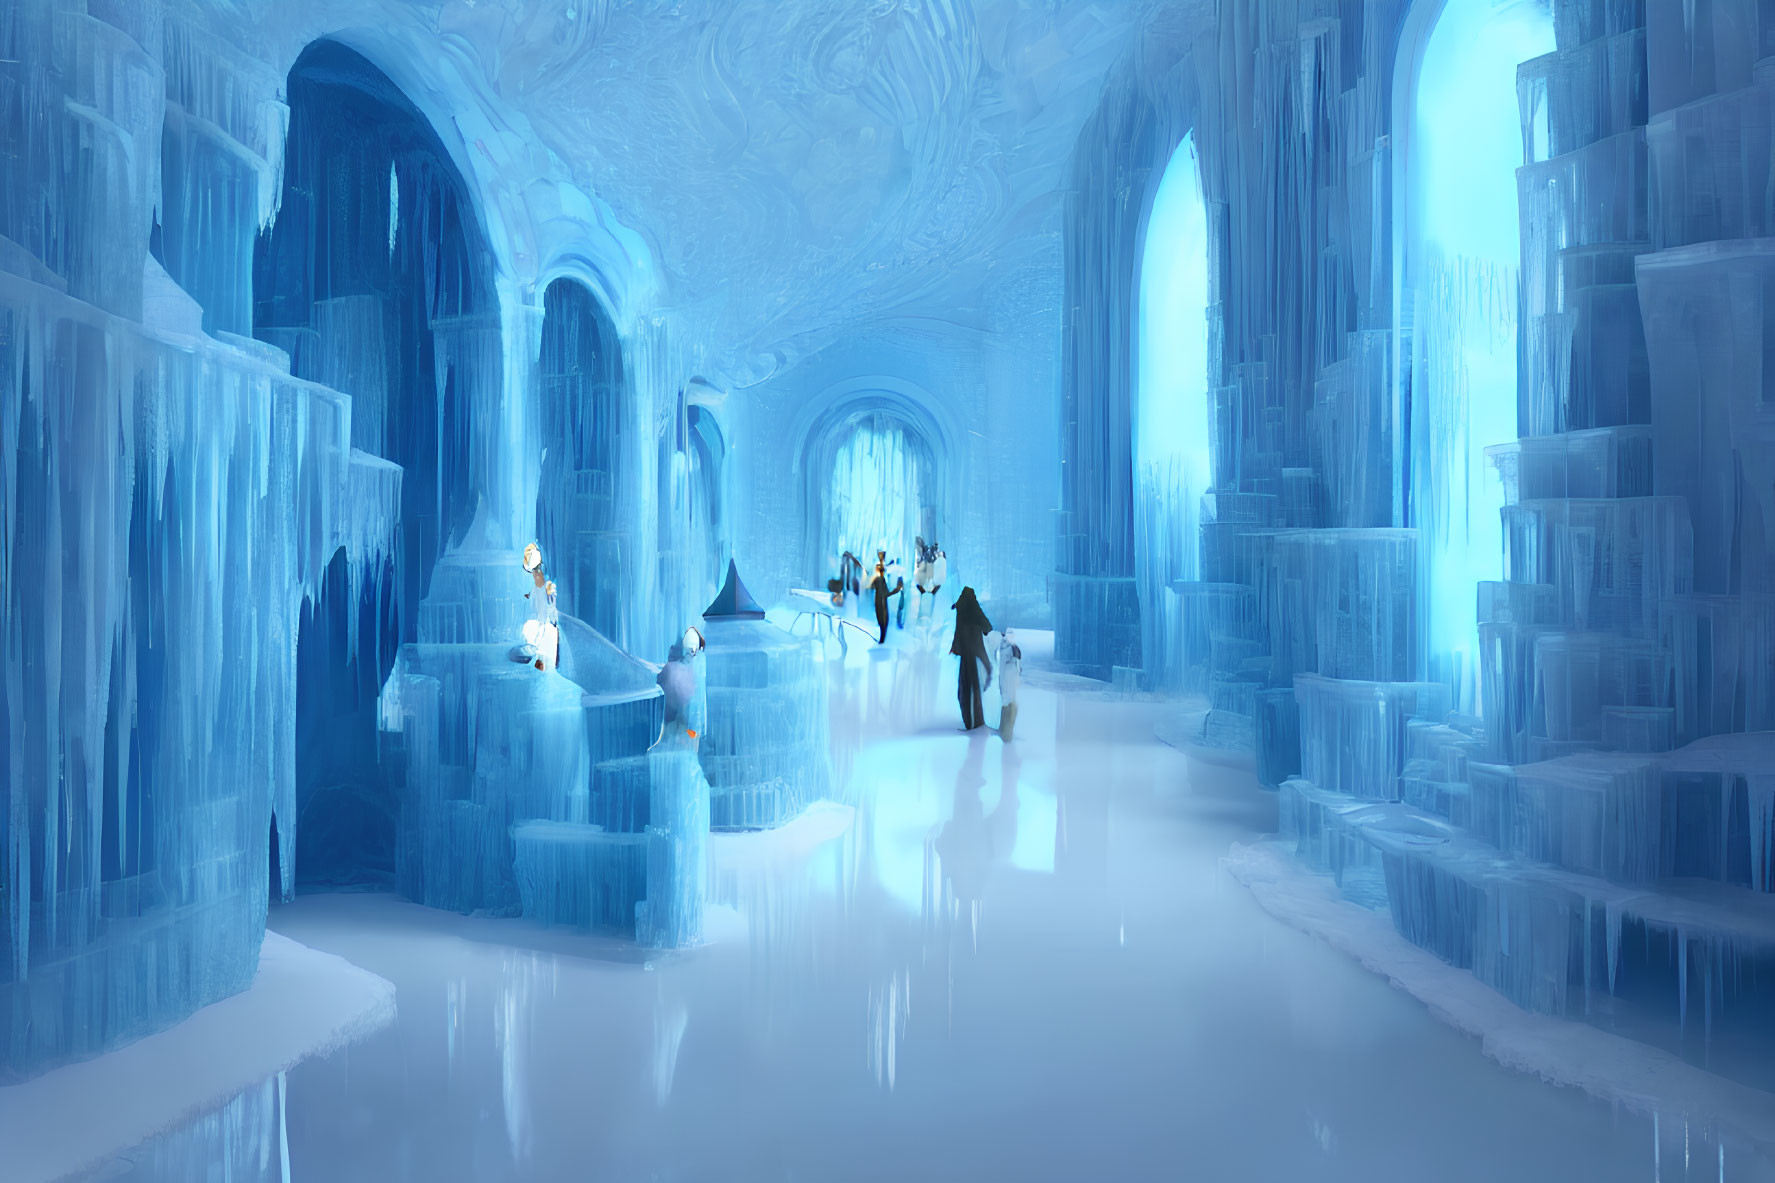 Majestic ice palace with grand hall and ethereal lighting